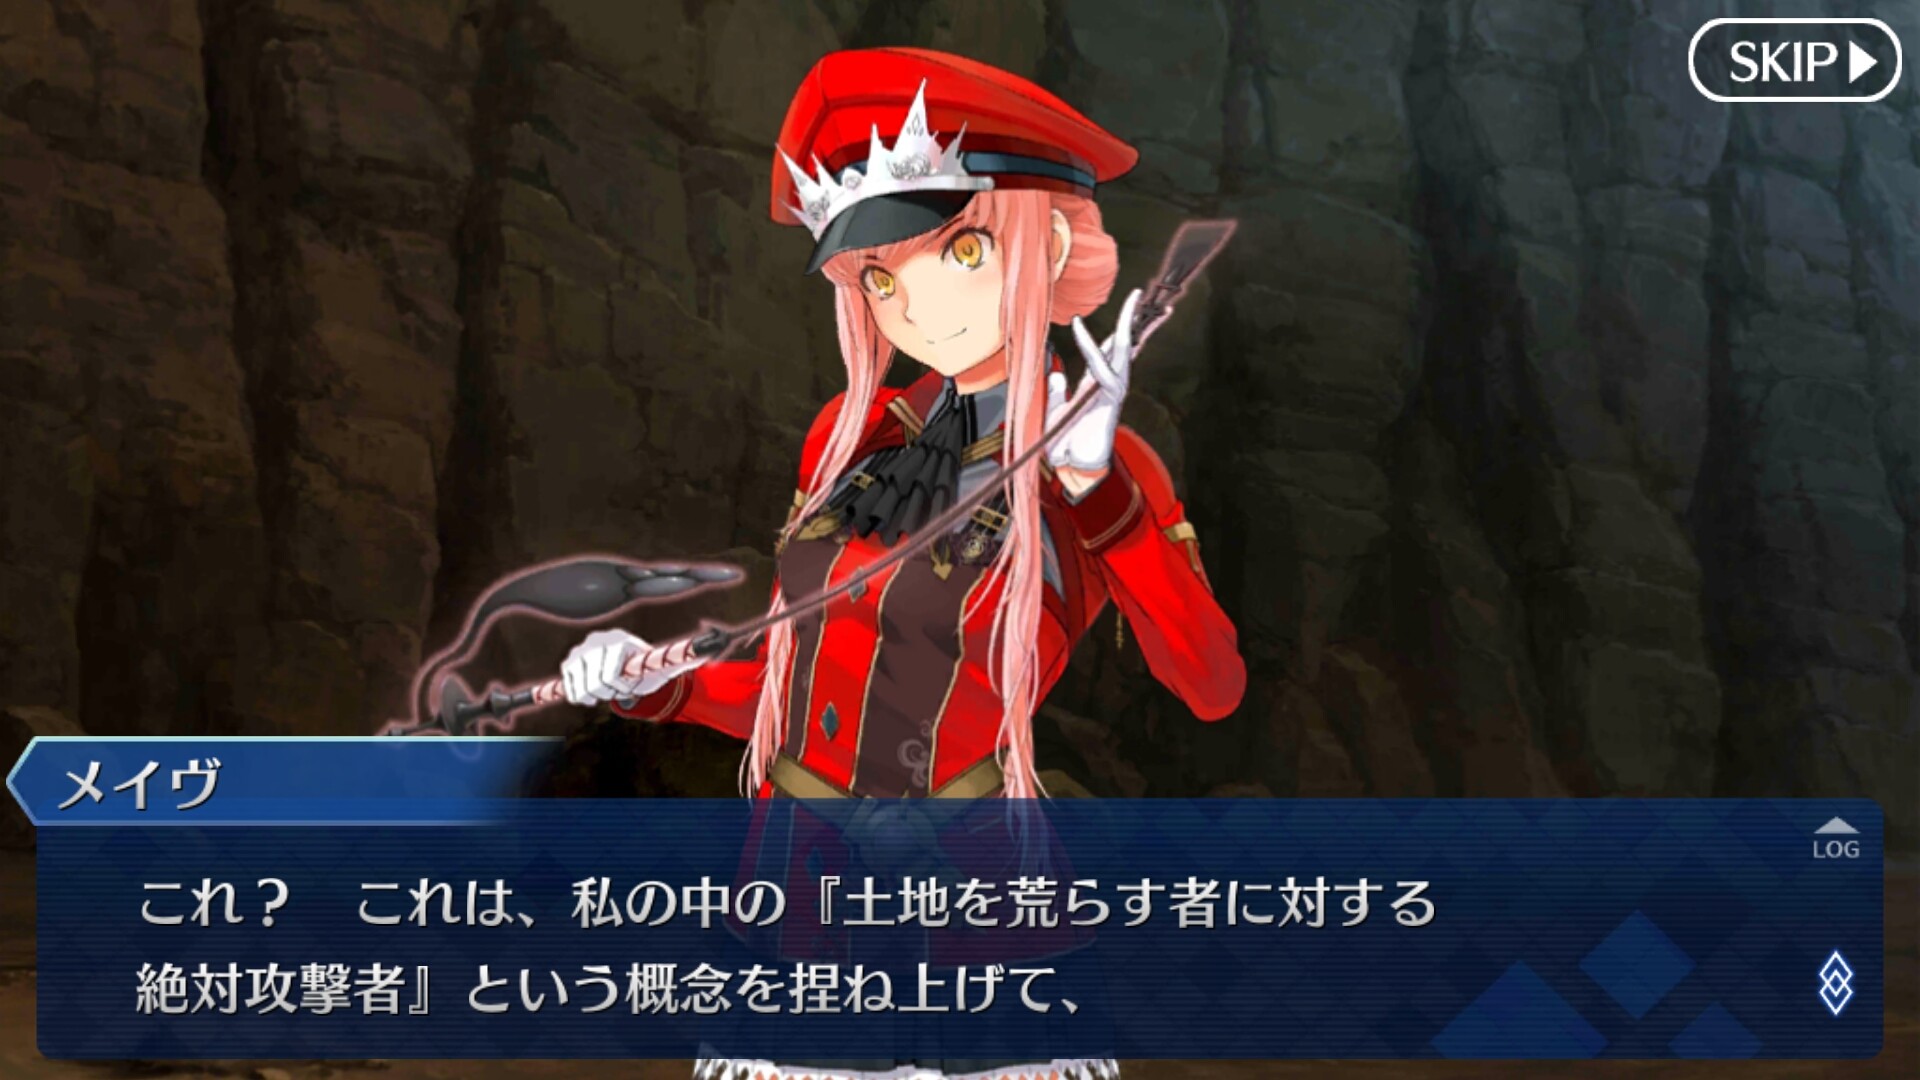 1920x1080 Everyone meet our new Prison Officer-Medb